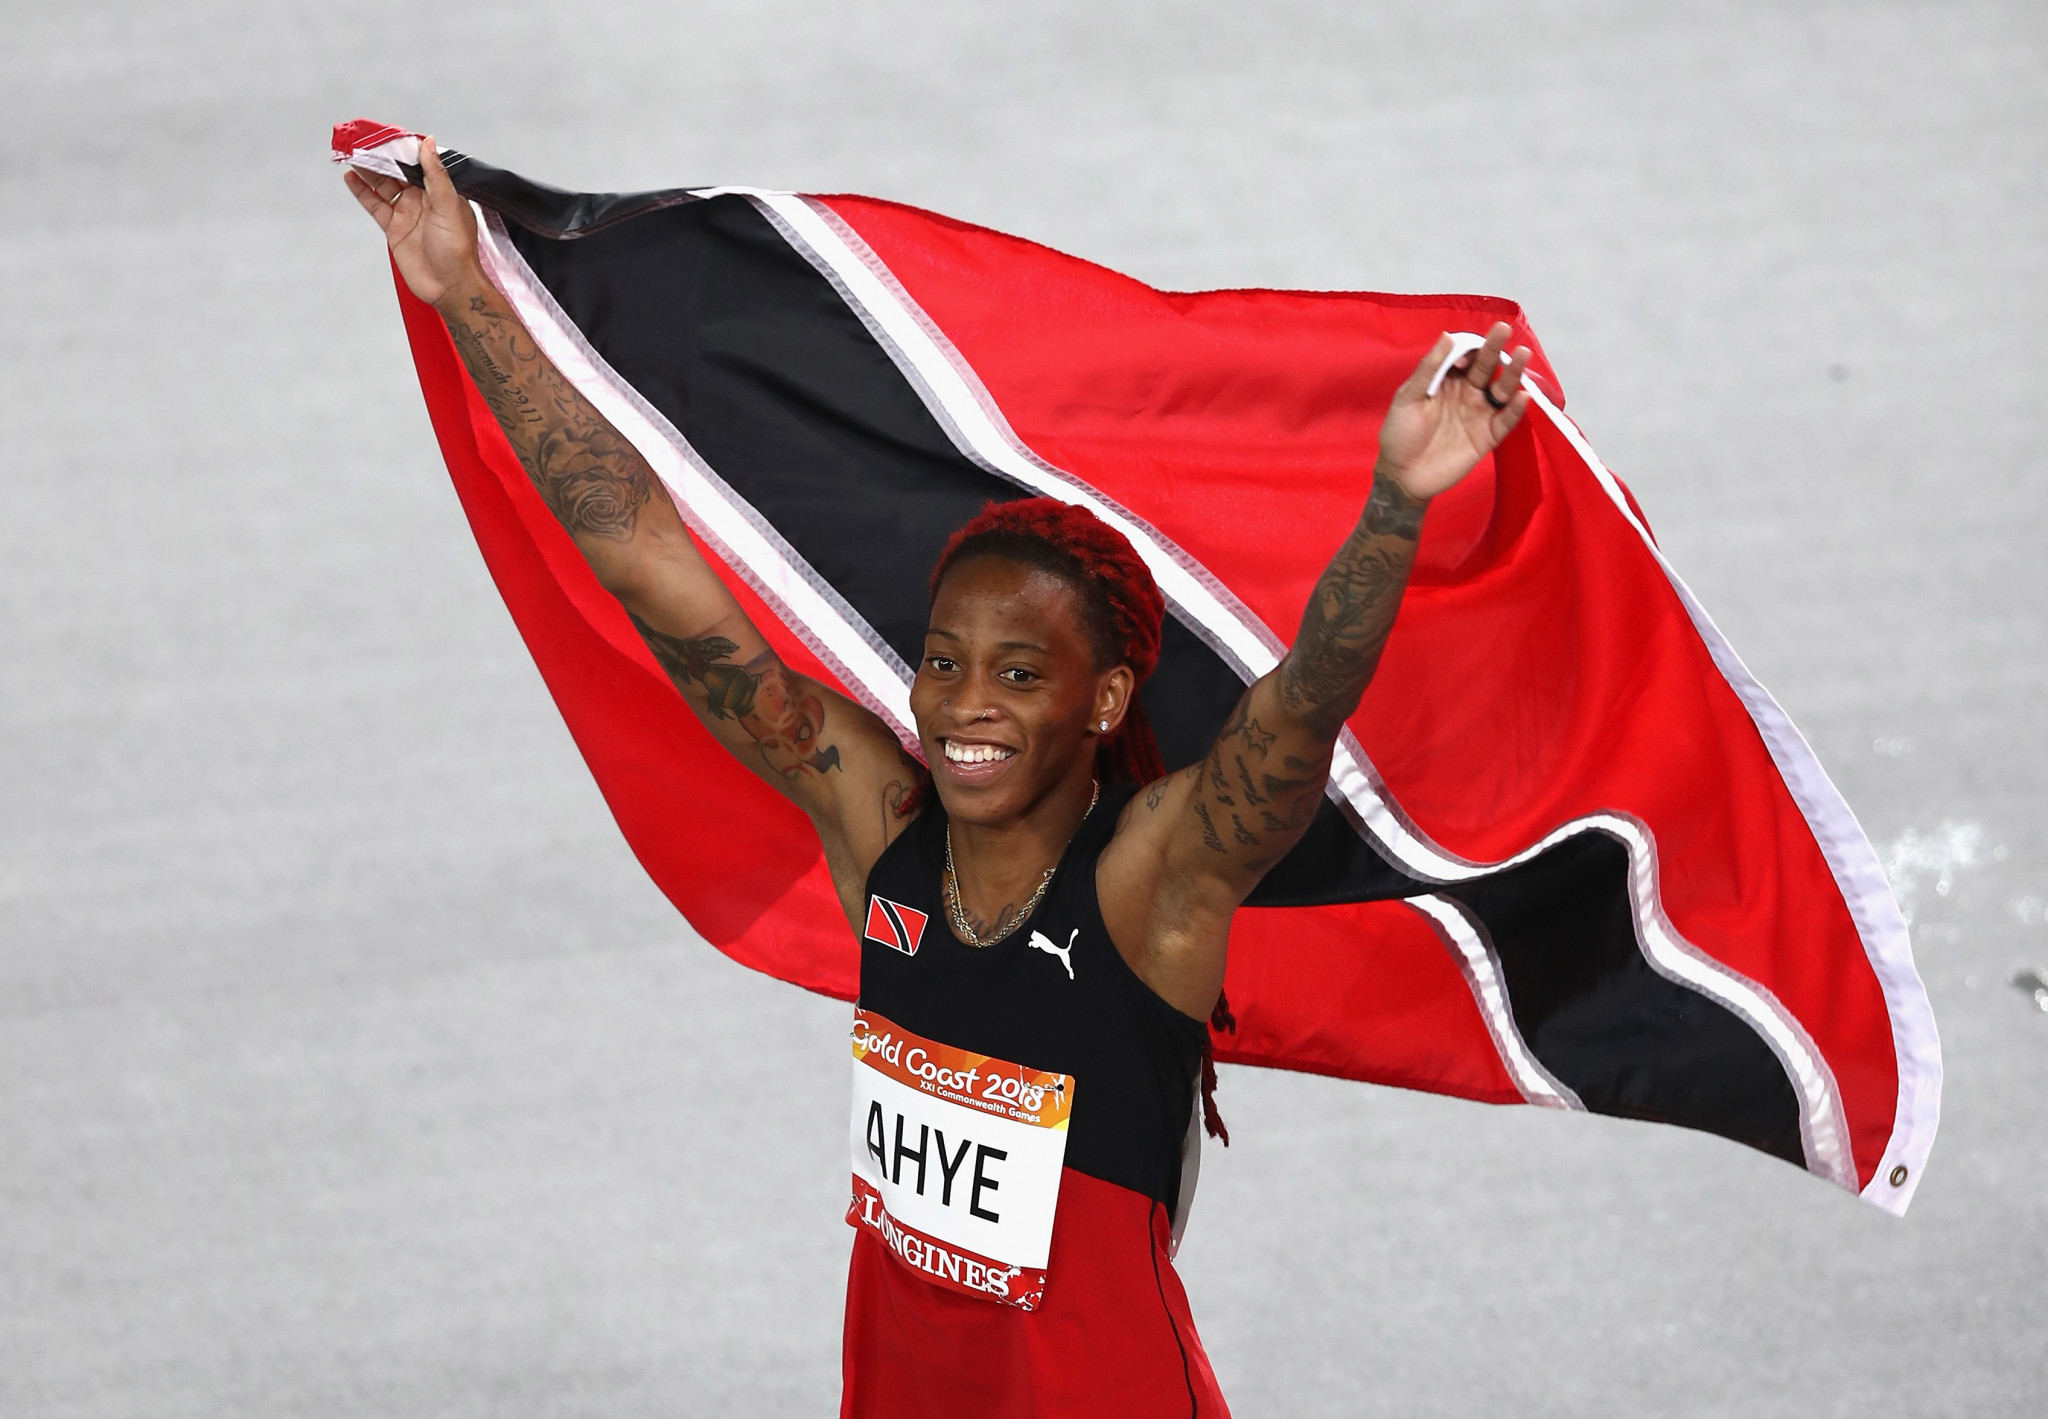 Michelle-Lee Ahye won the women's 100 metres title at Gold Coast 2018 ©Getty Images